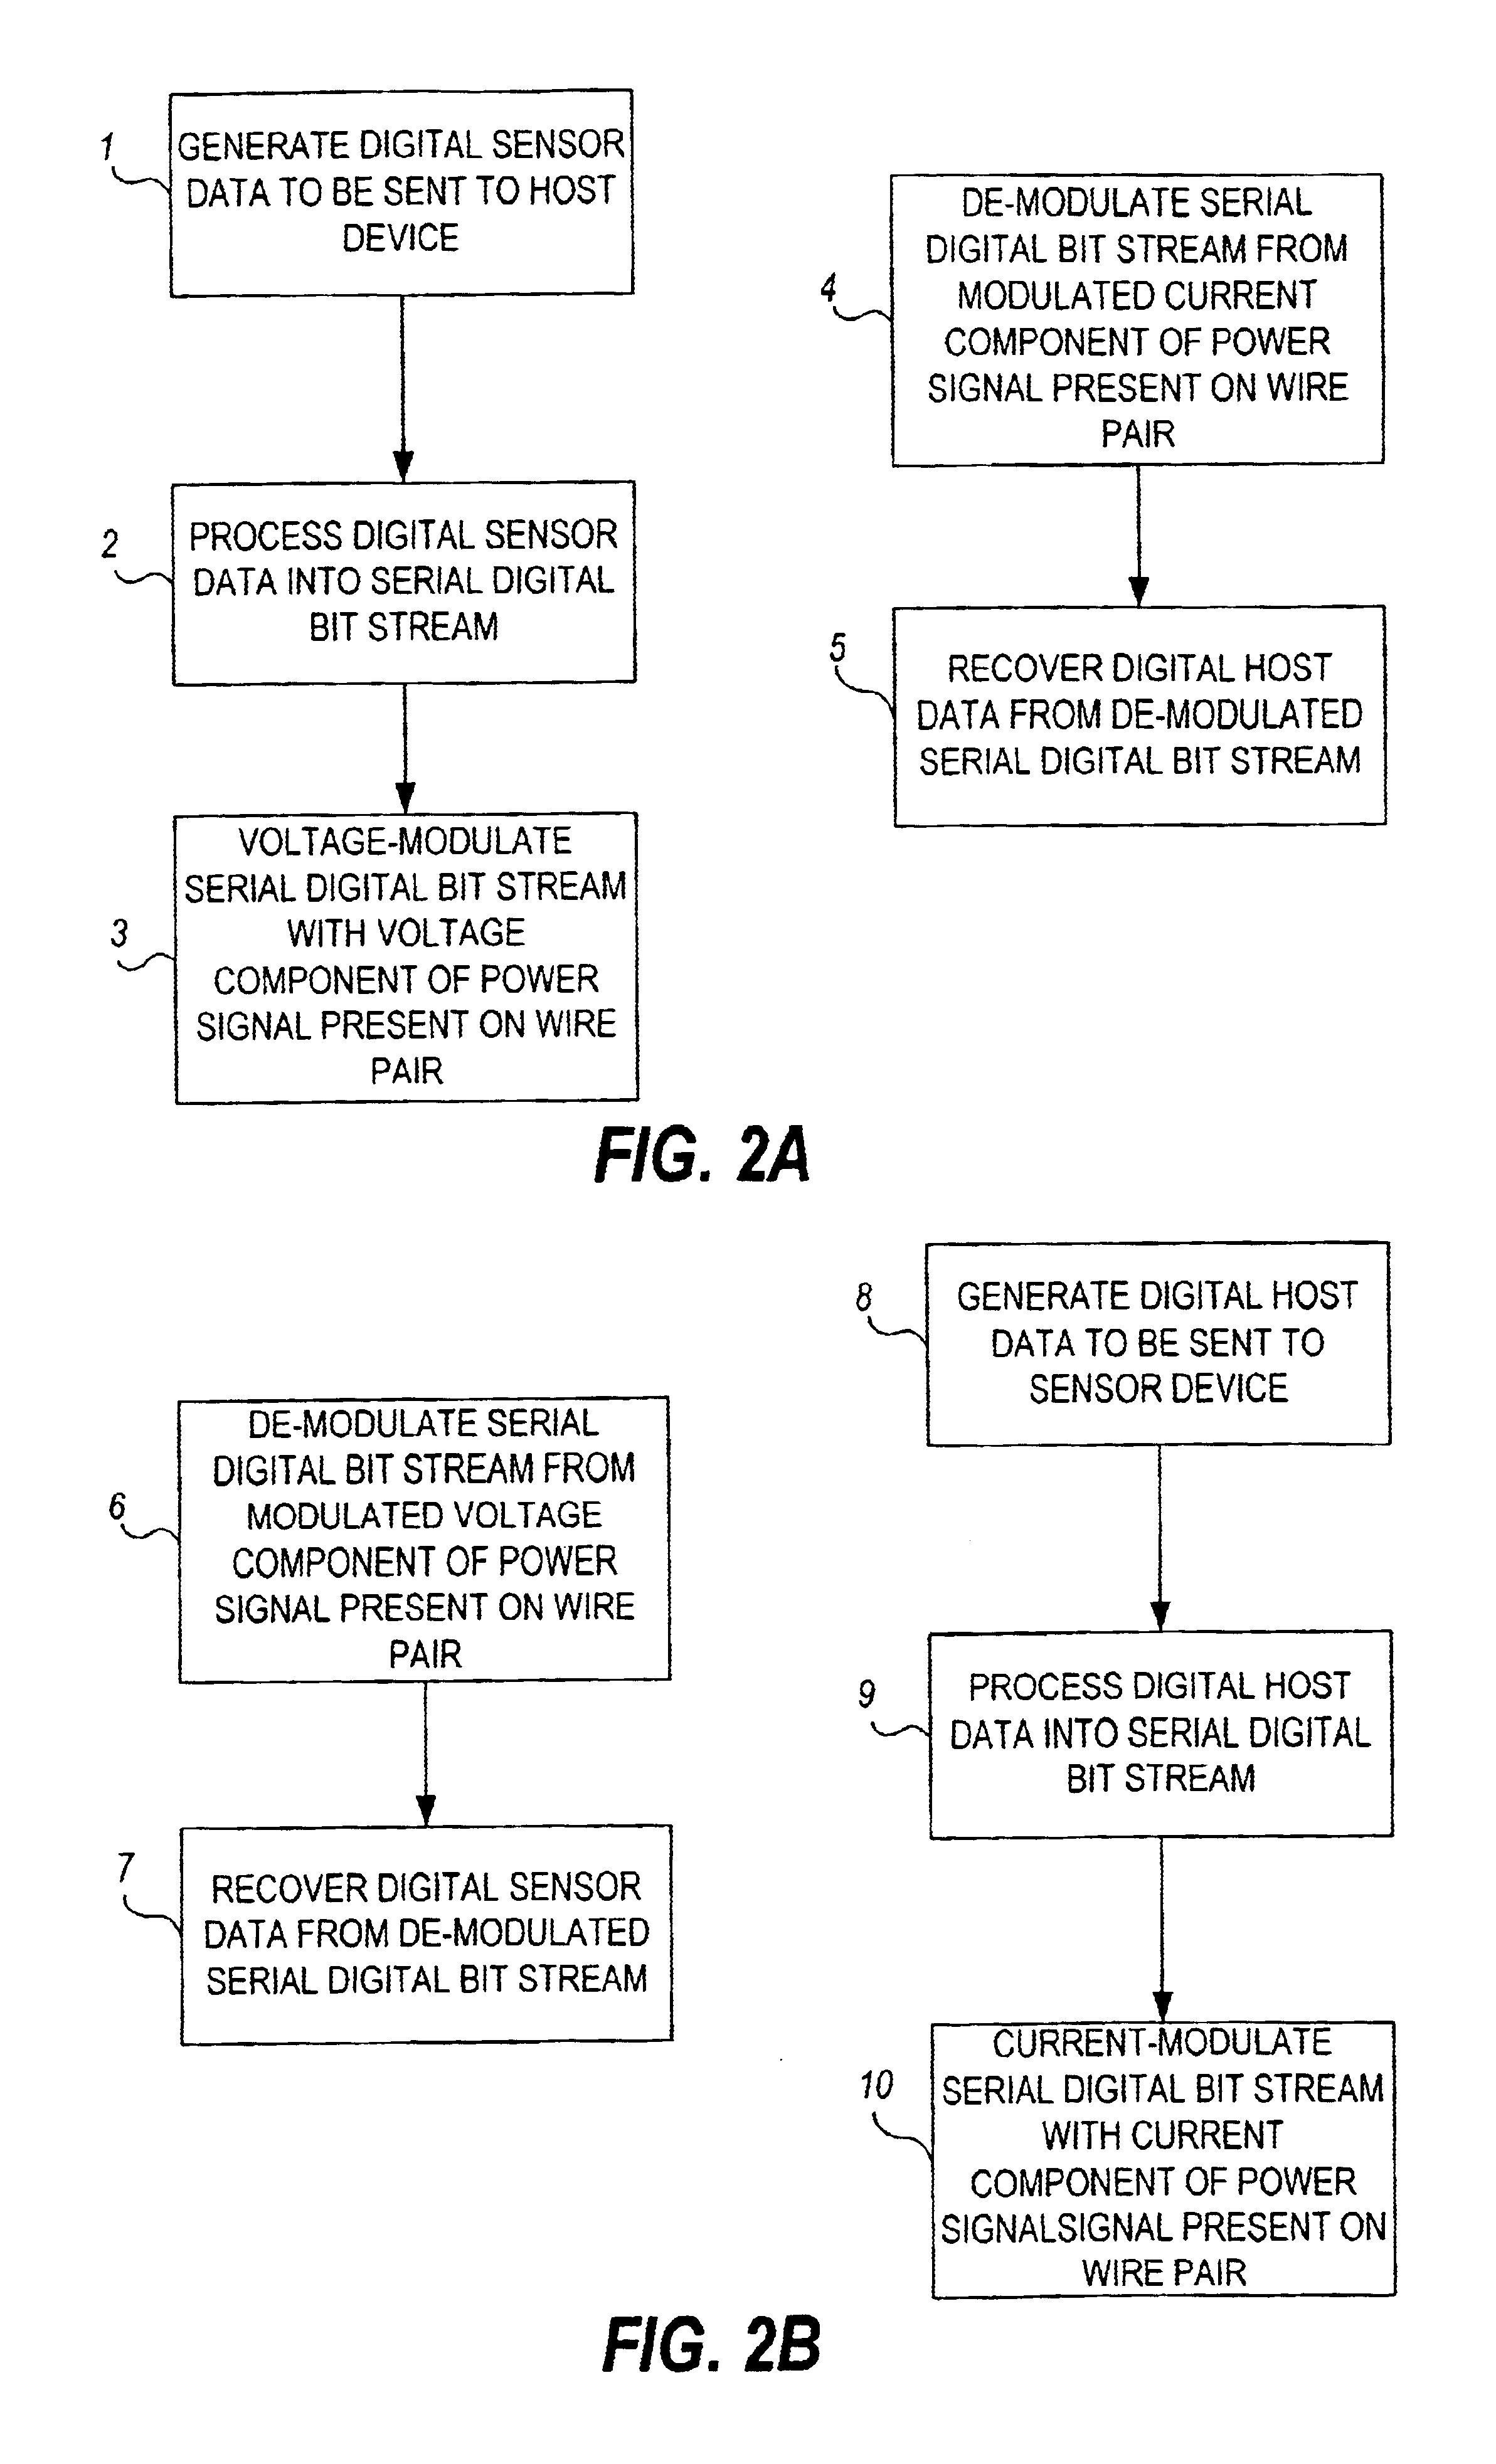 Method and apparatus for supplying power, and channeling analog measurement and communication signals over single pair of wires